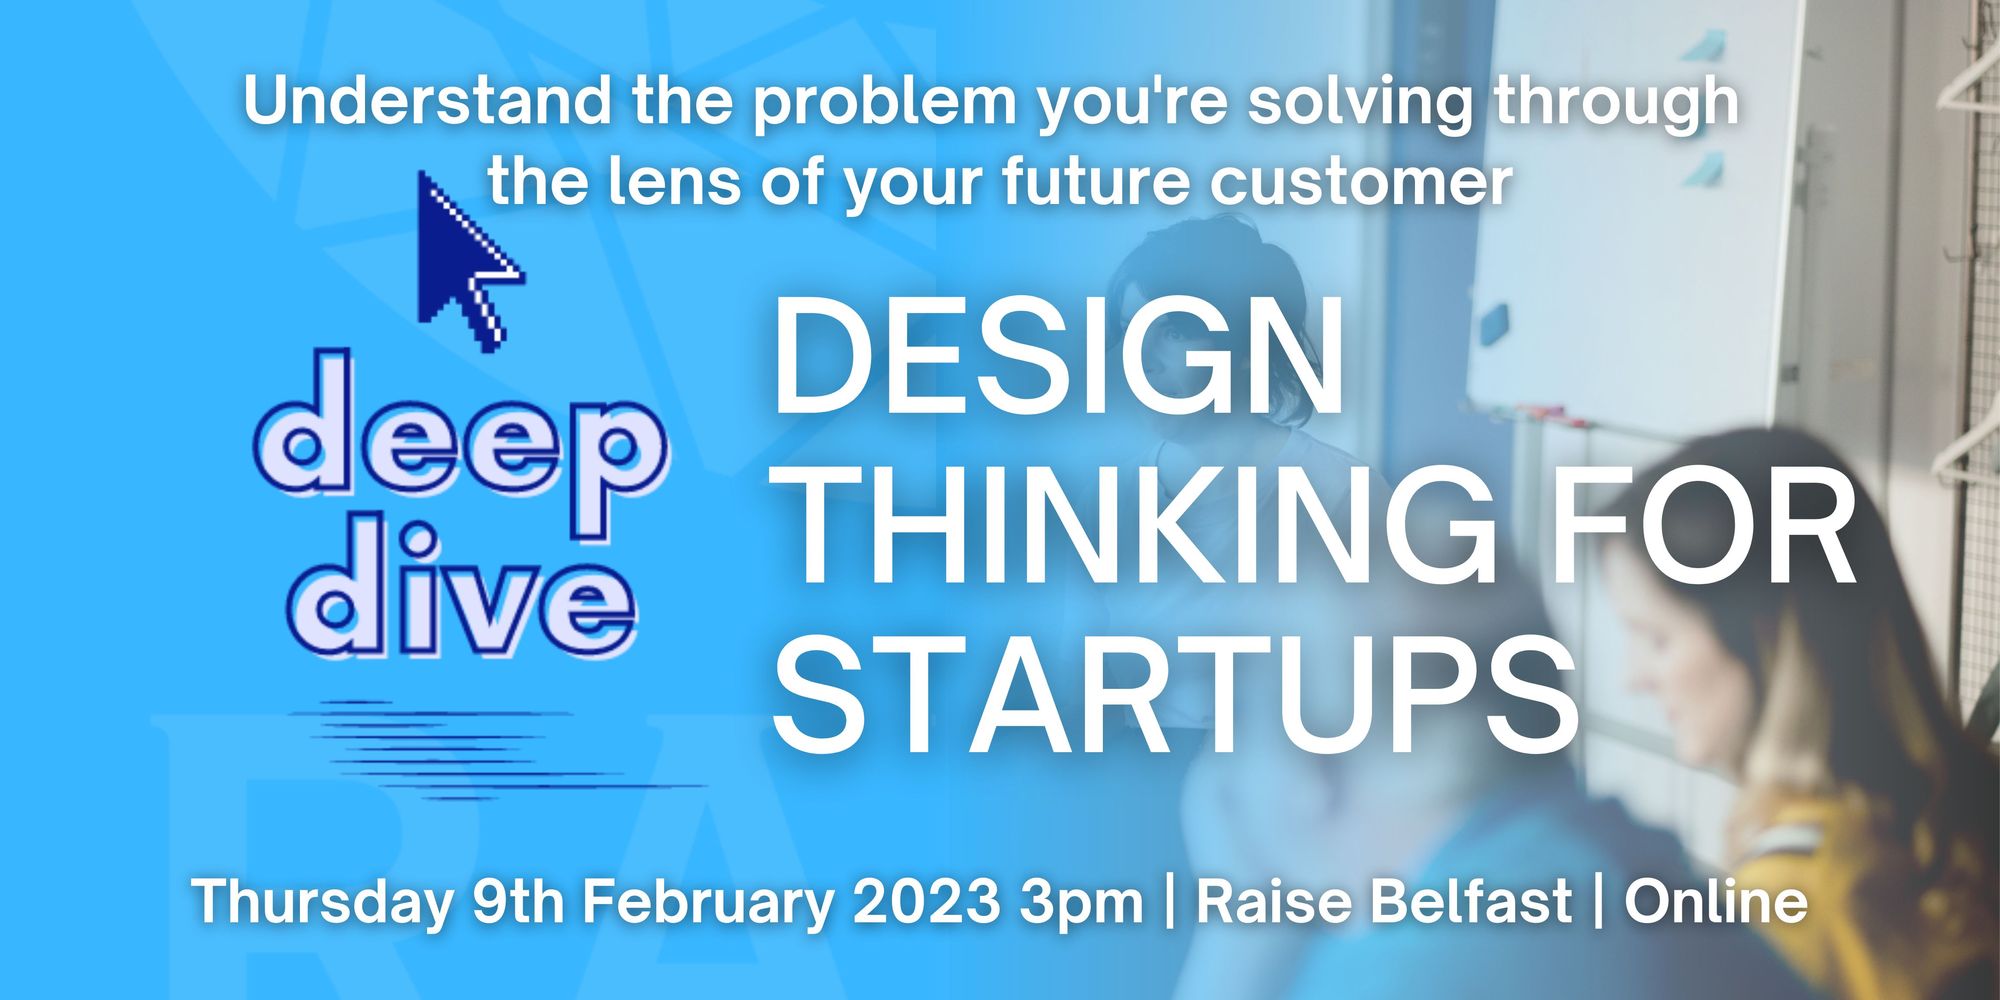 A graphic promoting a Design Thinking workshop for Startups on 9th February 2023